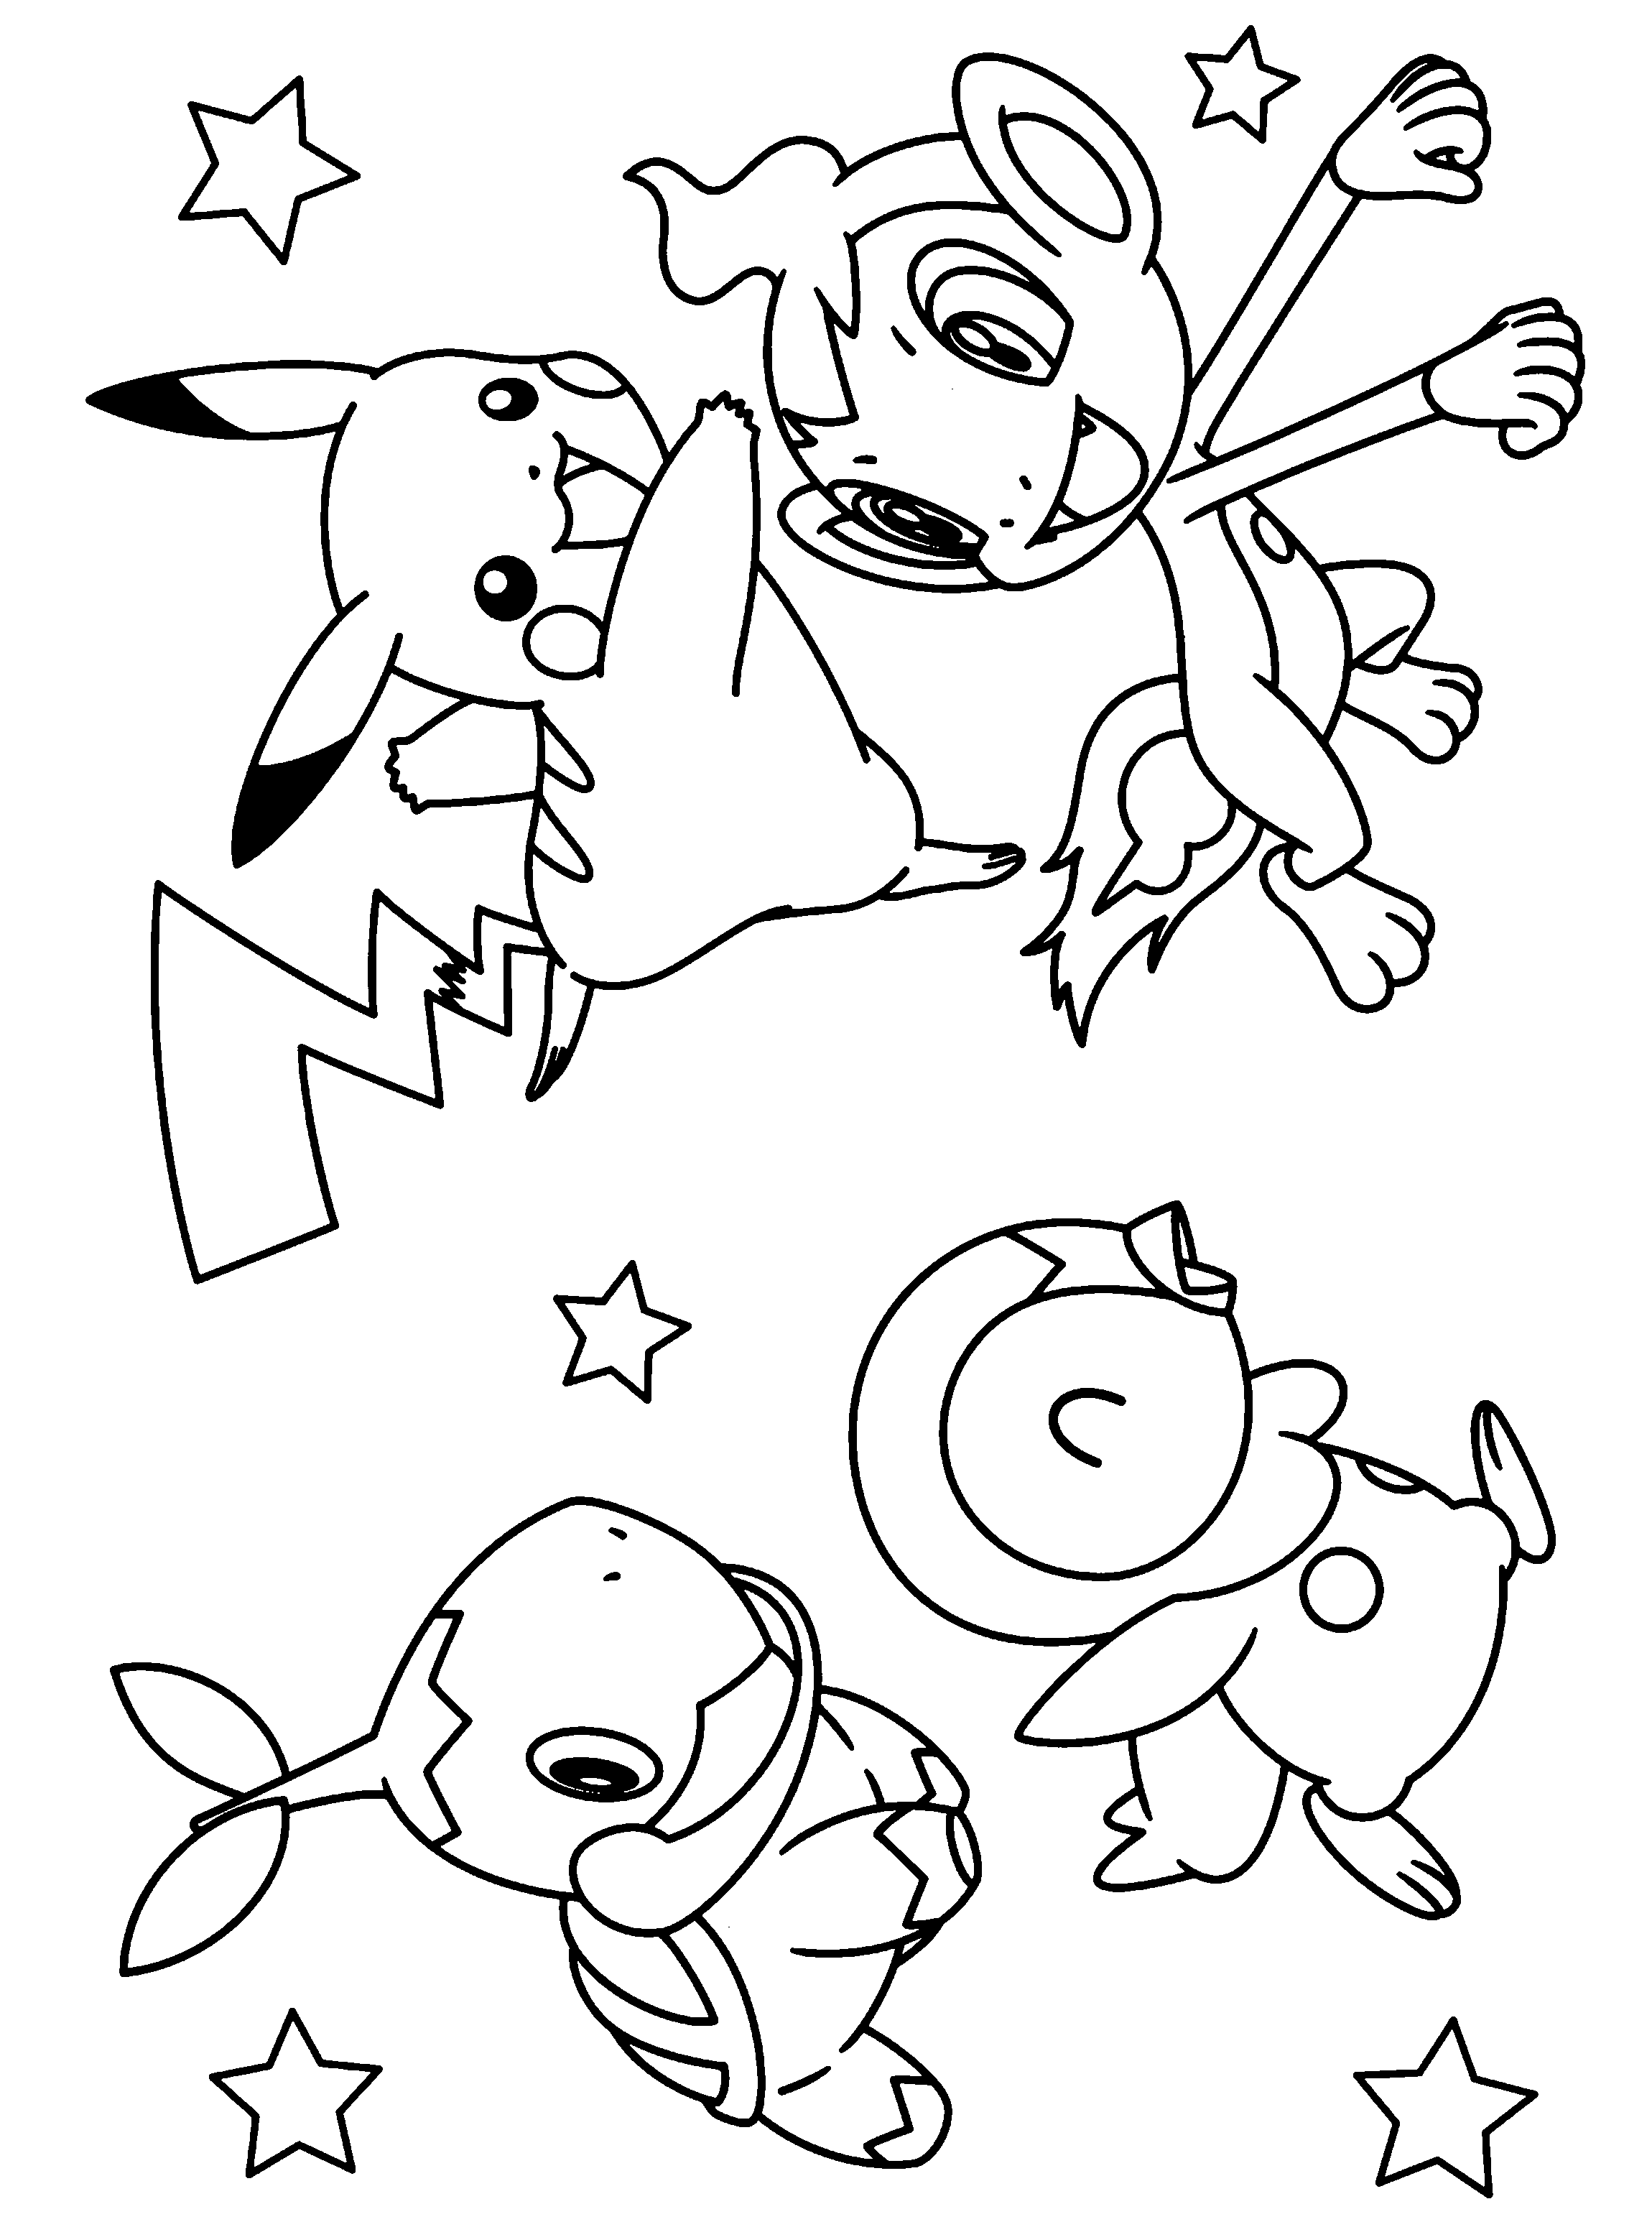 pokemon colouring pages online free pokemon colouring pages online free free online pokemon colouring pages 